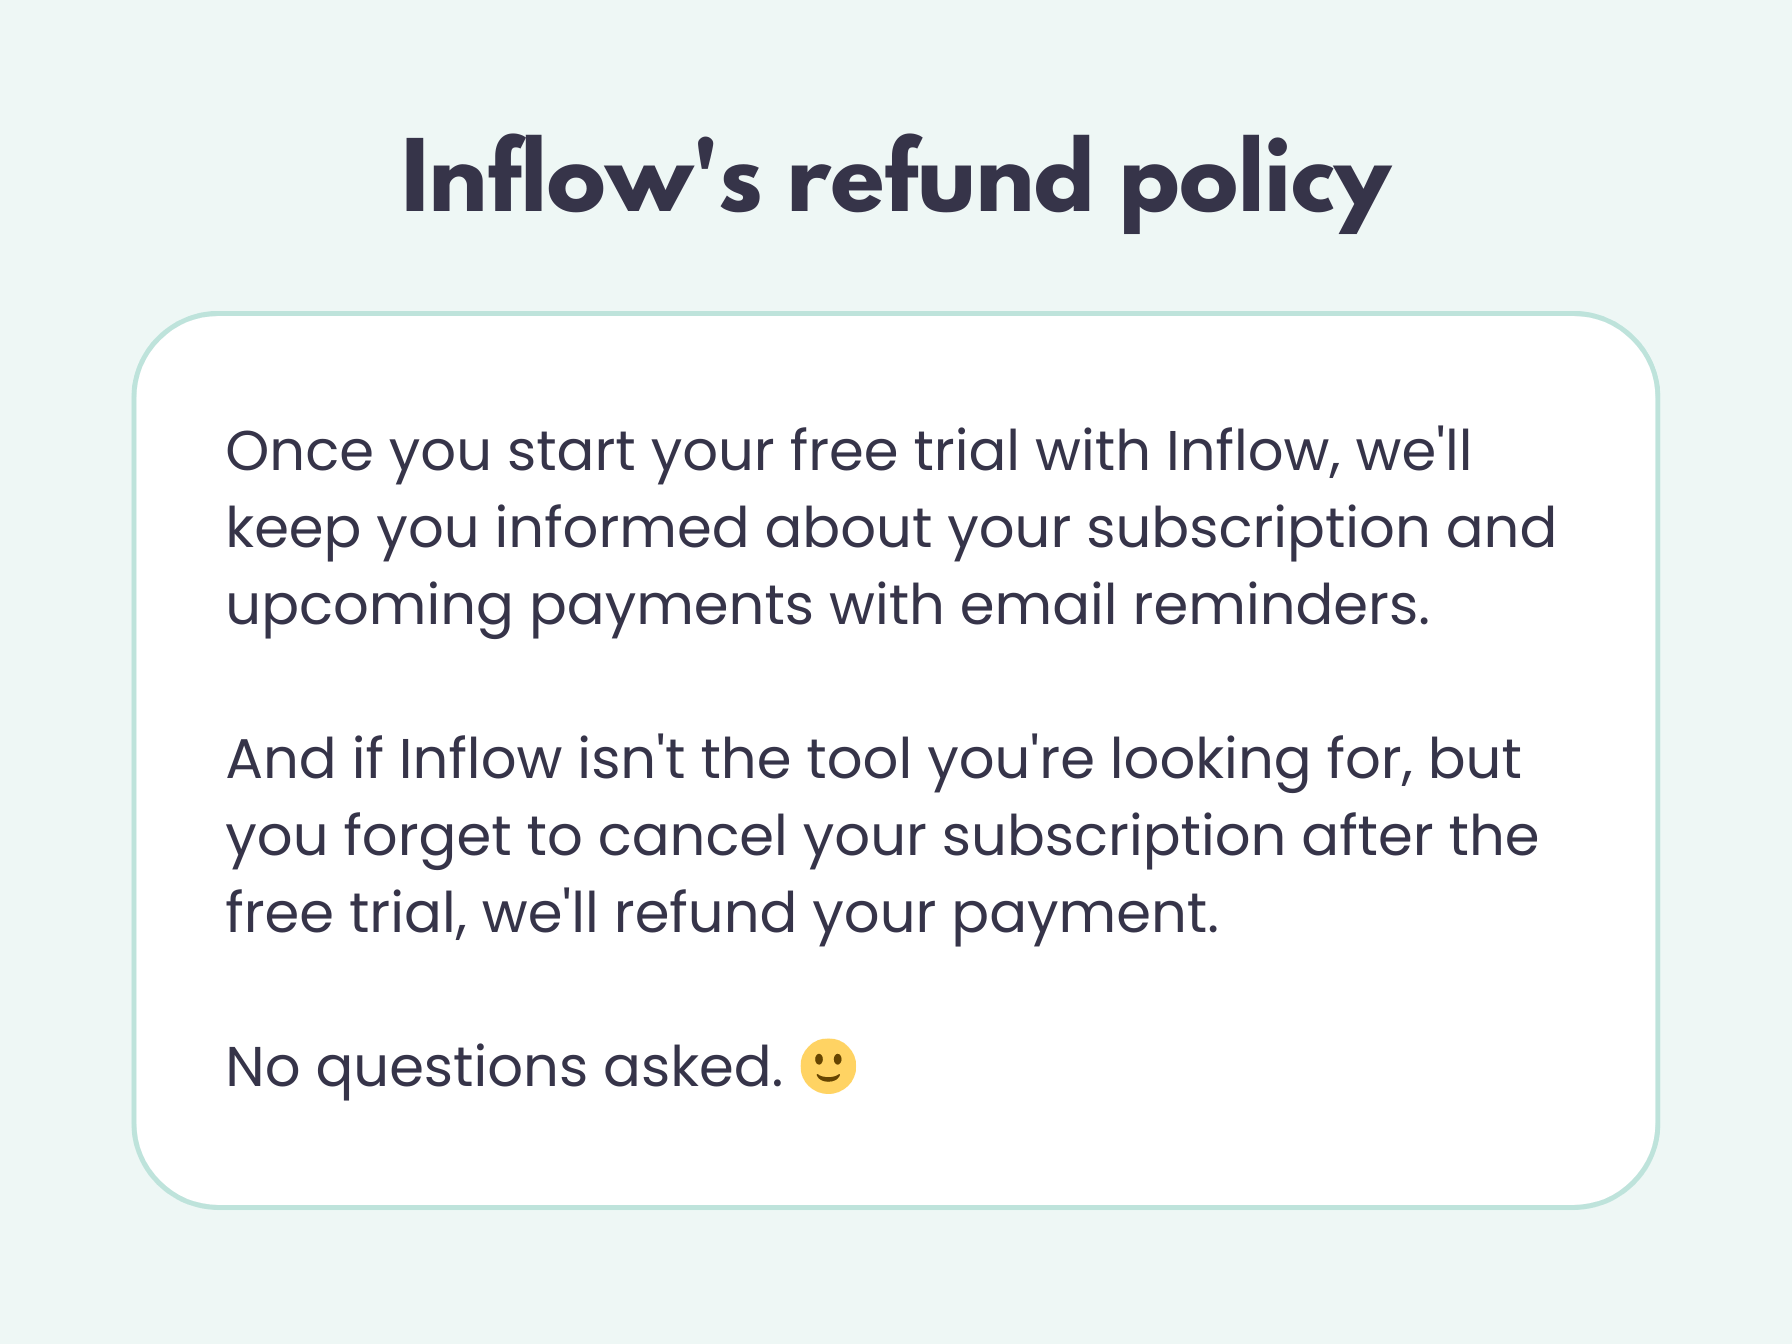 Inflow's refund policy: Once you start your free trial with Inflow, we'll keep you informed about your subscription and upcoming payments with email reminders.  And if Inflow isn't the tool you're looking for, but you forget to cancel your subscription after the free trial, we'll refund your payment.  No questions asked.